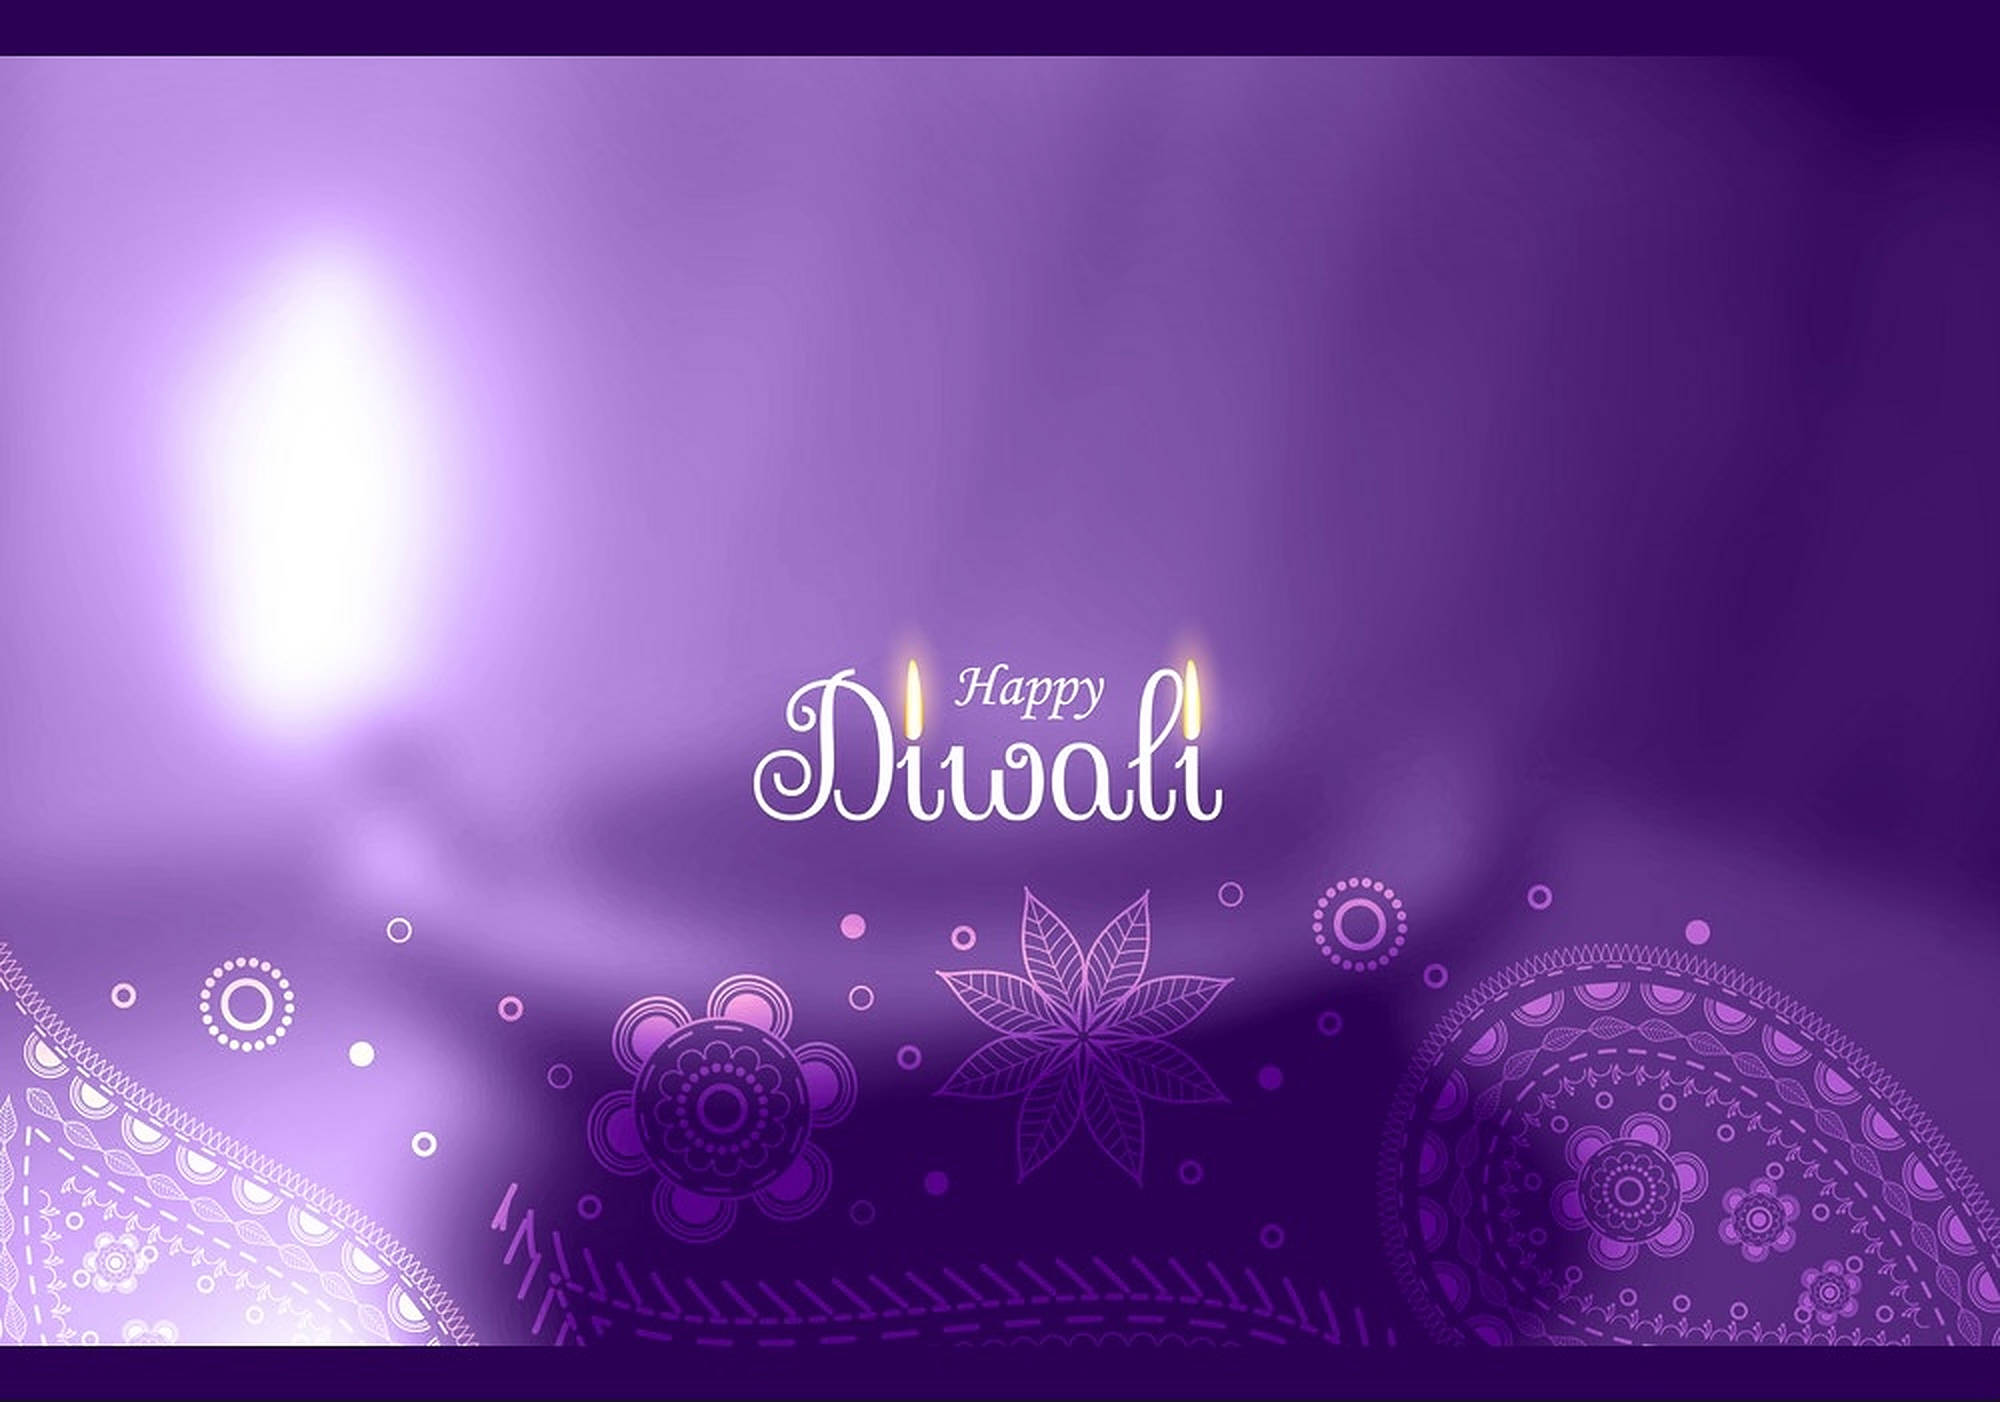 Fantastic Poster With The Word â€œdiwaliâ€ On A Purple Backdrop With White Distinctive Floral Patterns Below.